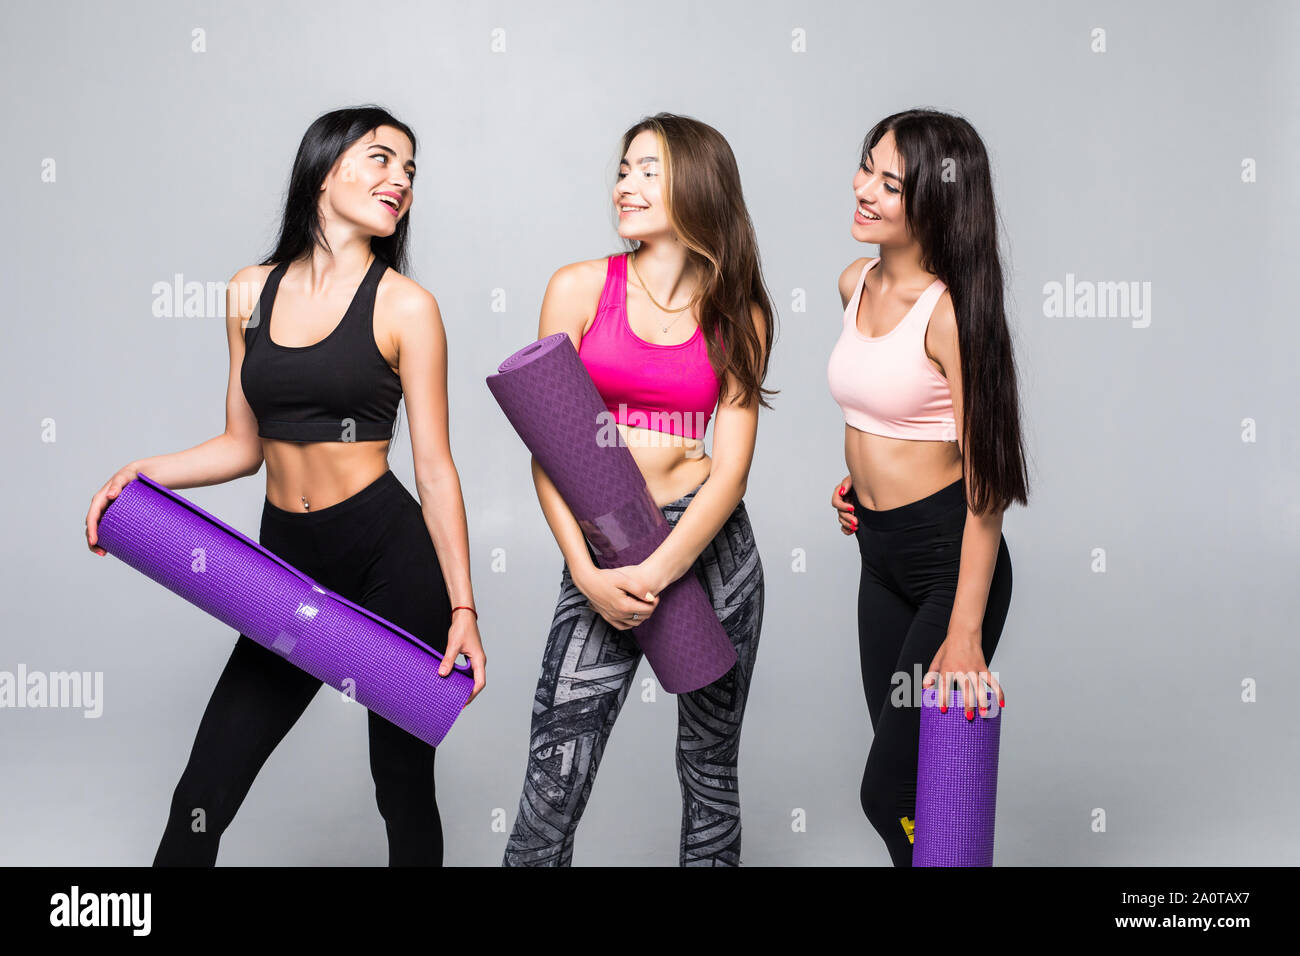 https://c8.alamy.com/comp/2A0TAX7/three-fitness-young-girls-in-sportswear-standing-against-wall-in-fitness-gym-girls-smiling-and-looking-to-the-camera-2A0TAX7.jpg